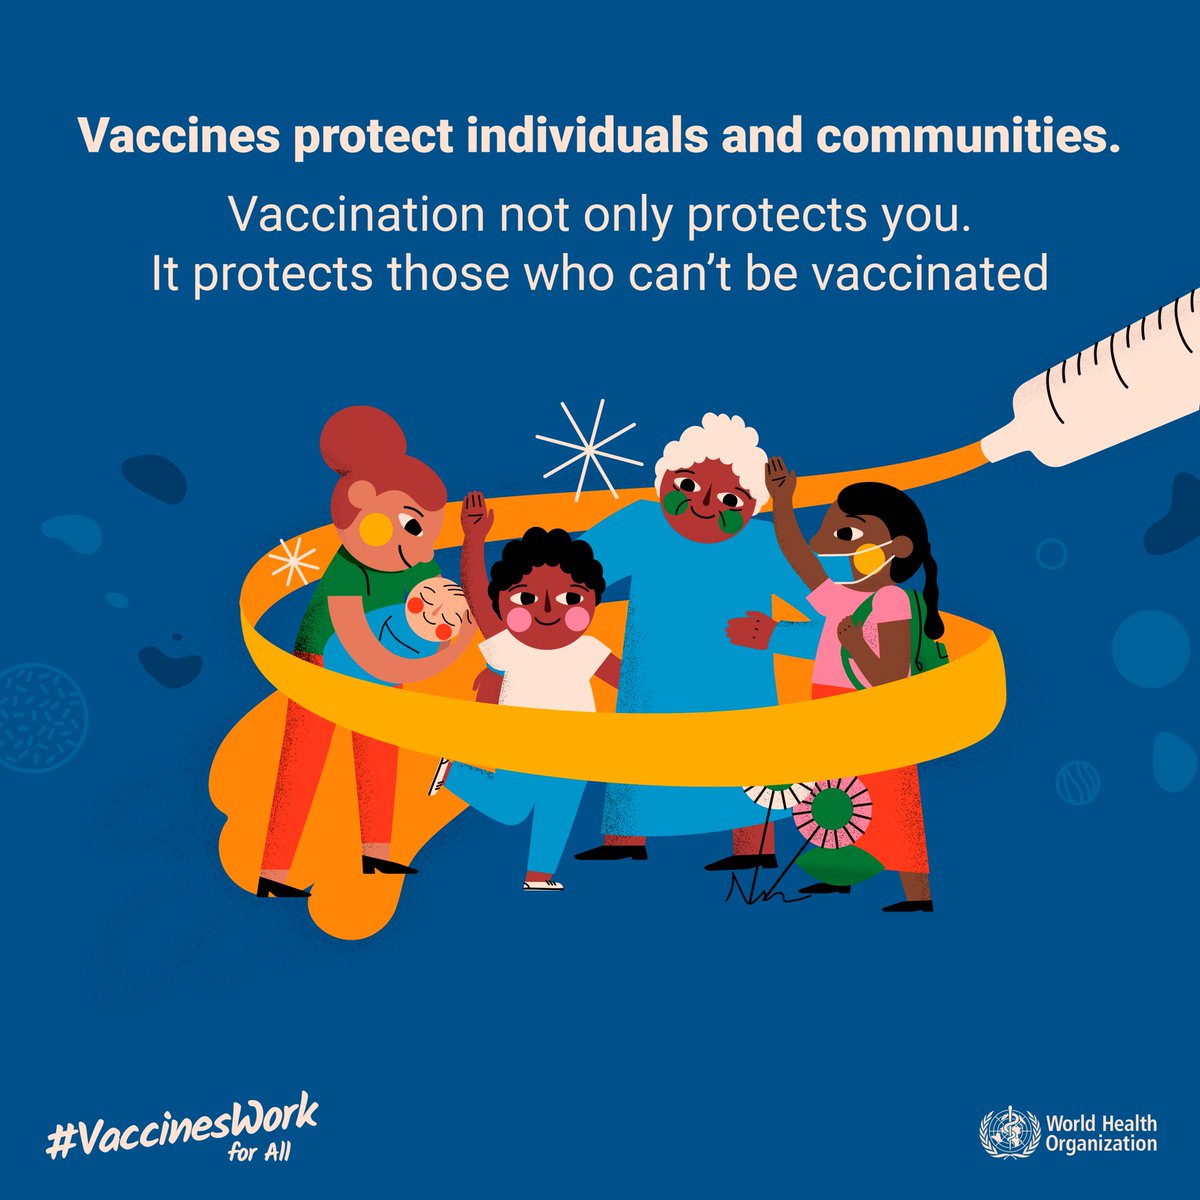 Immunization is a shared responsibility.If only some people are vaccinated, diseases can still spread, especially to those at highest risk:Infants who are too young to receive vaccinesOlder adults at risk of serious diseasesPeople with low immunity #VaccinesWork